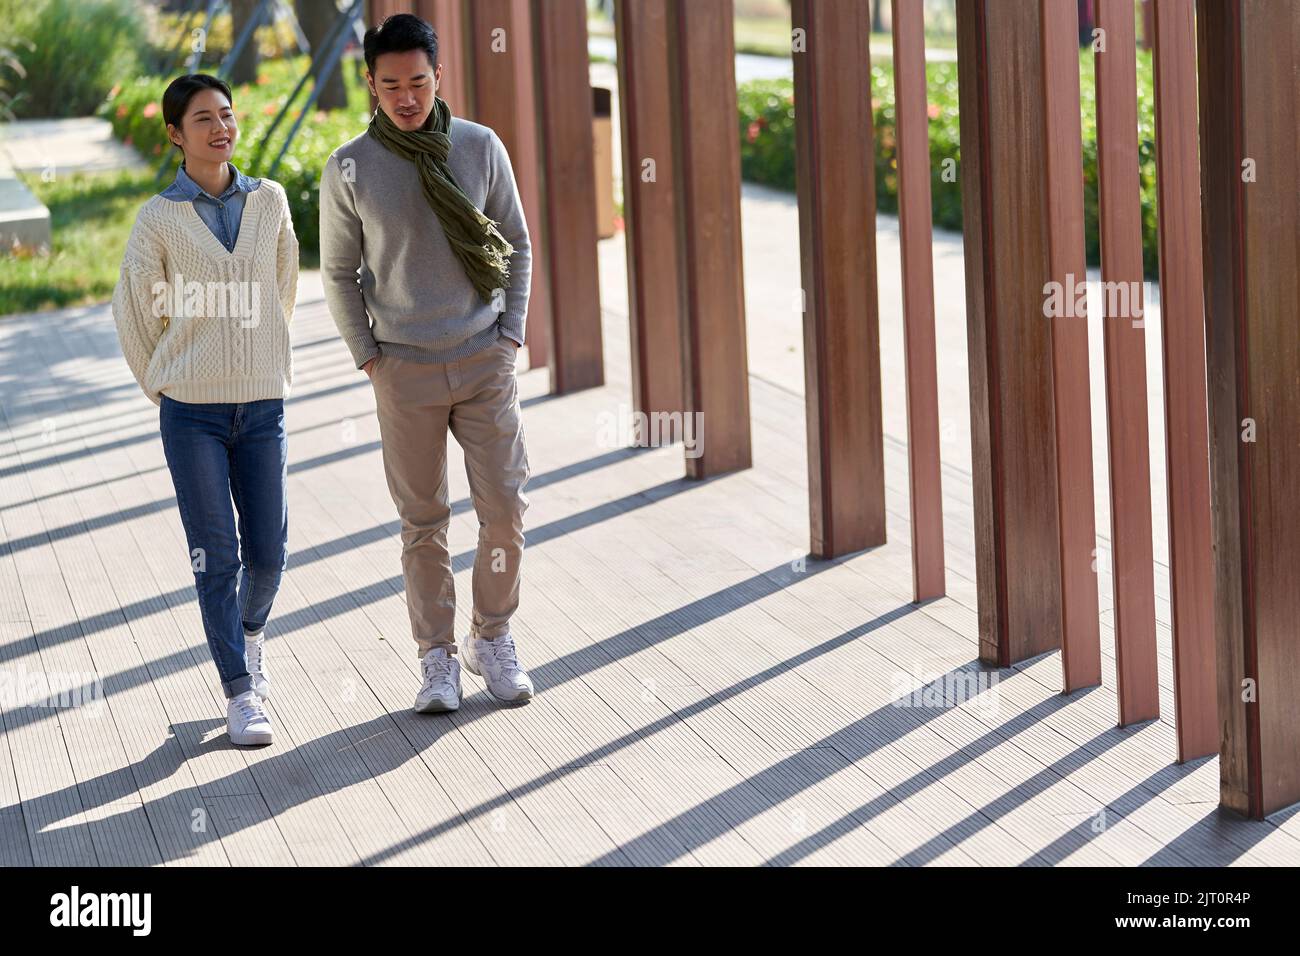 young asian dating couple walking and chatting outdoors in park happy and smiling Stock Photo